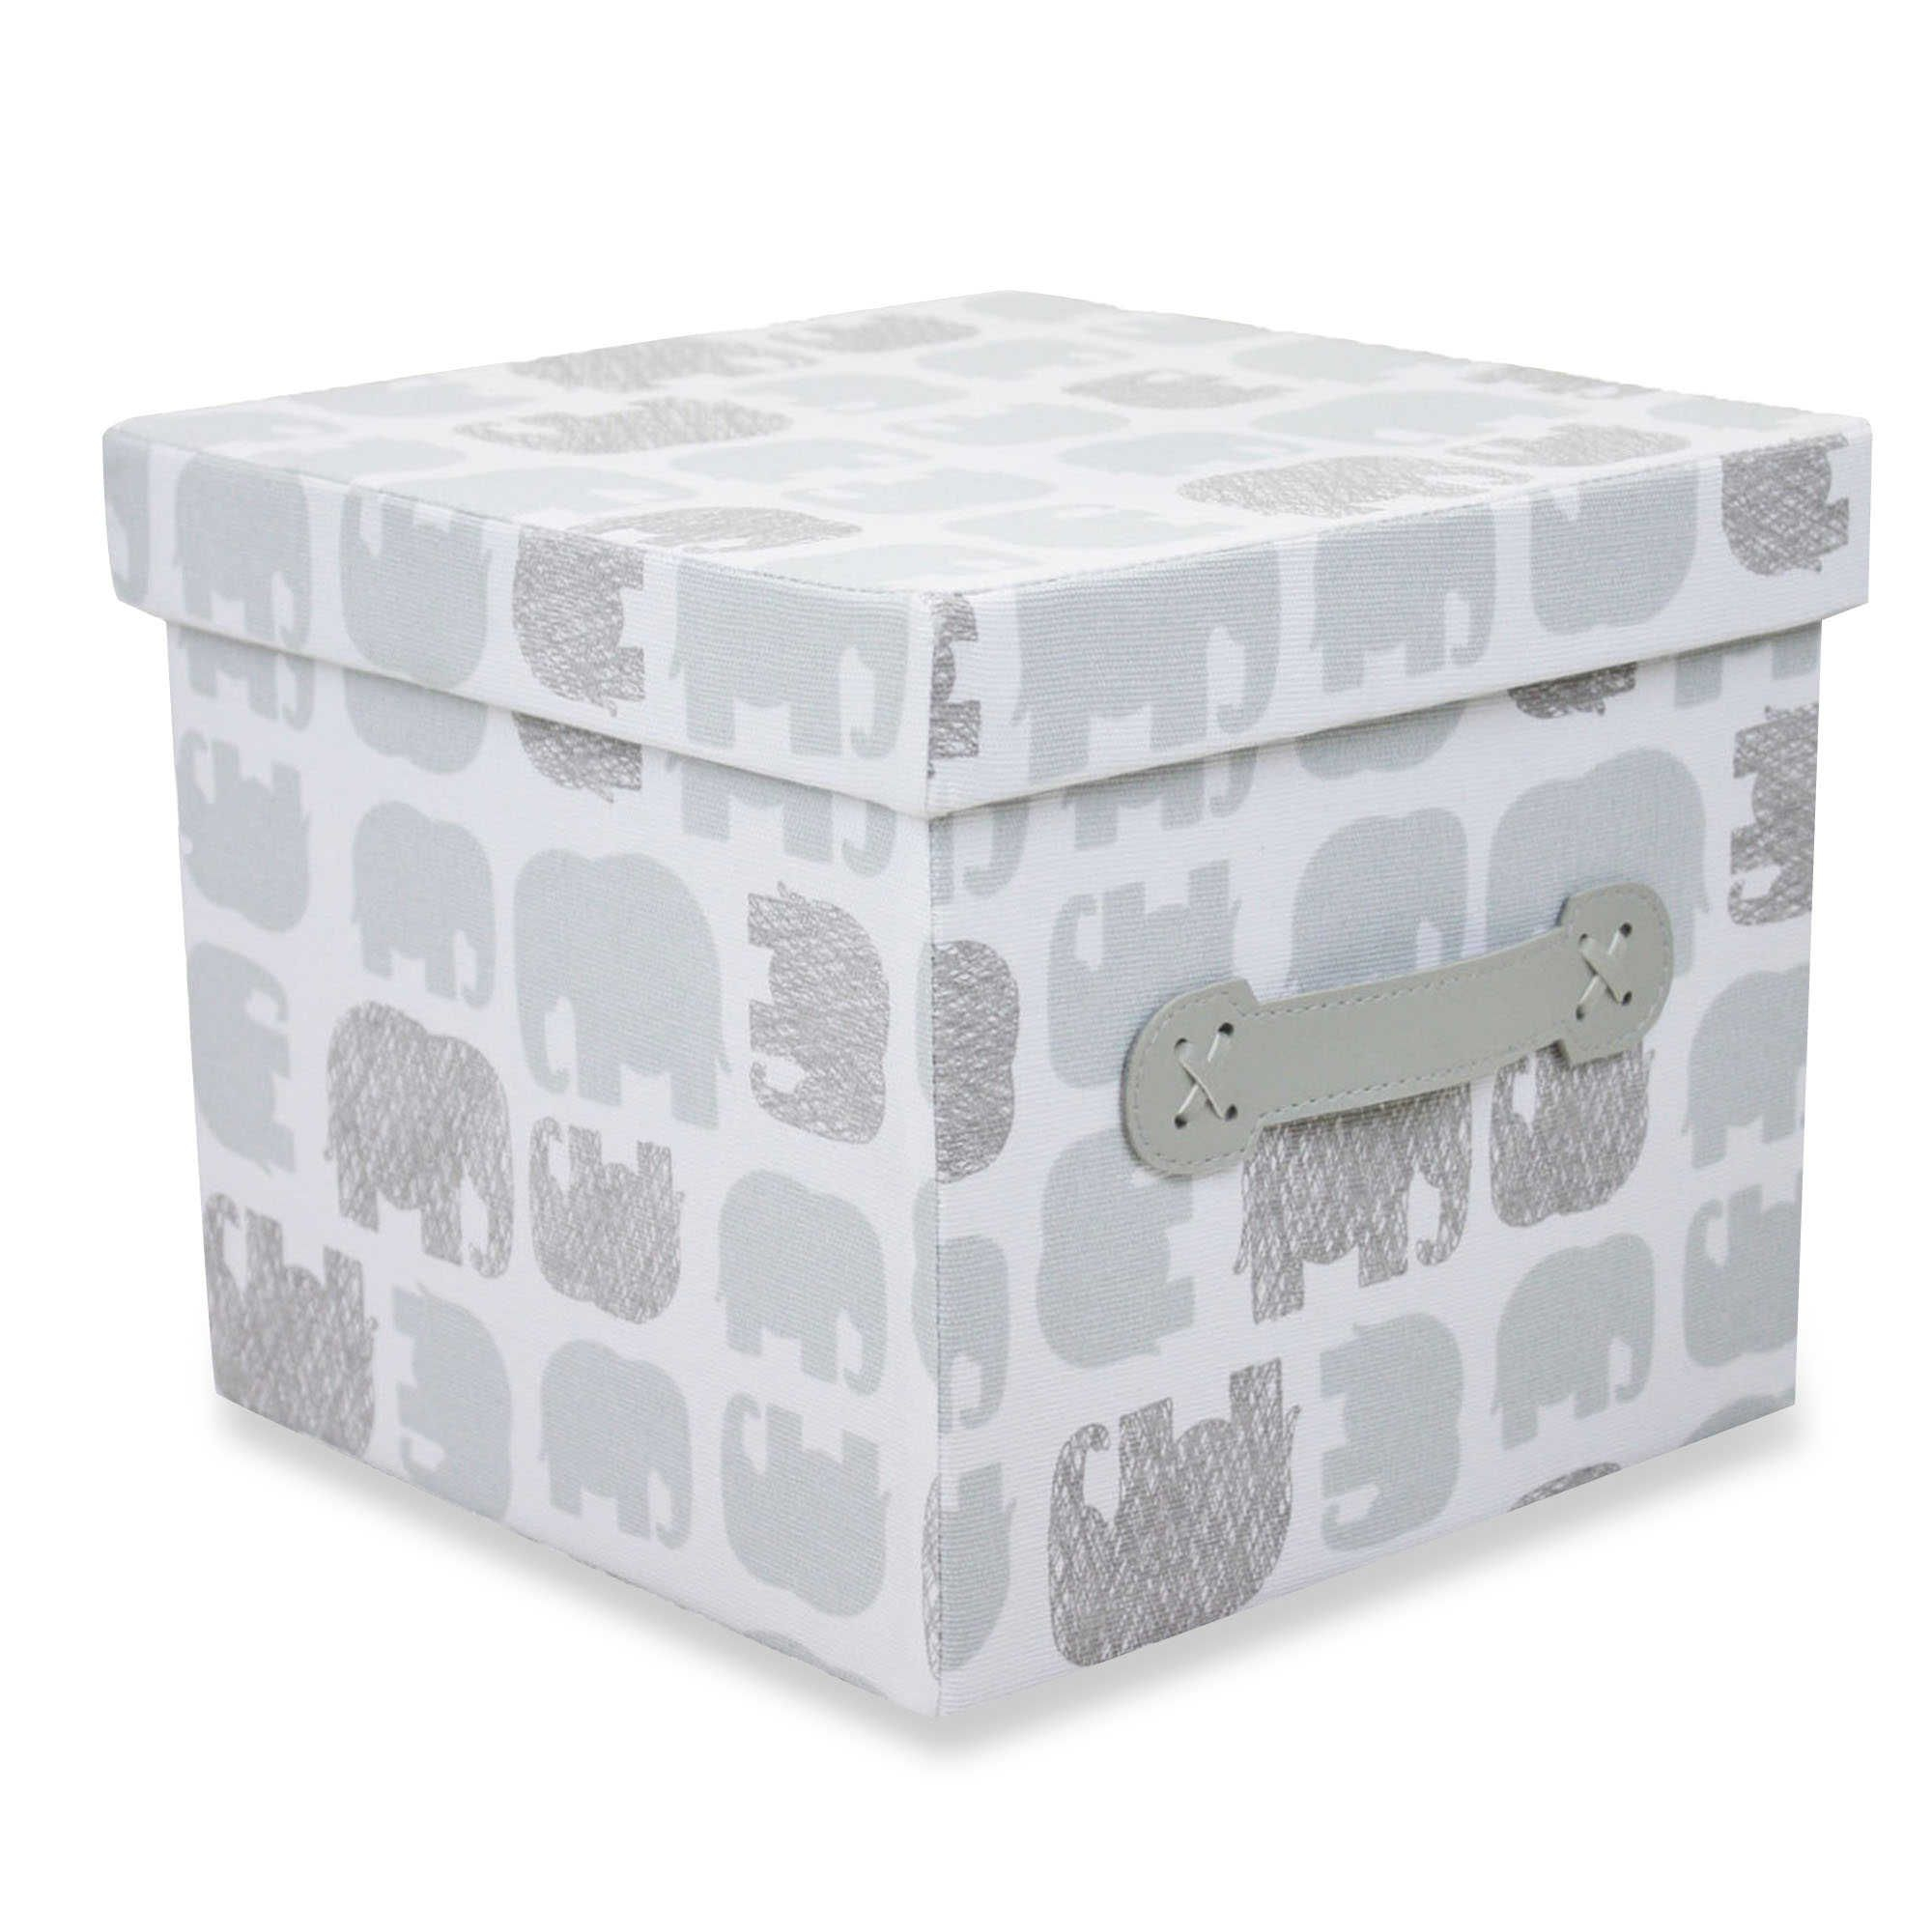 Rgi Elephant Storage Box Bed Bath Beyond 15 Maybe More Babies with regard to proportions 2000 X 2000